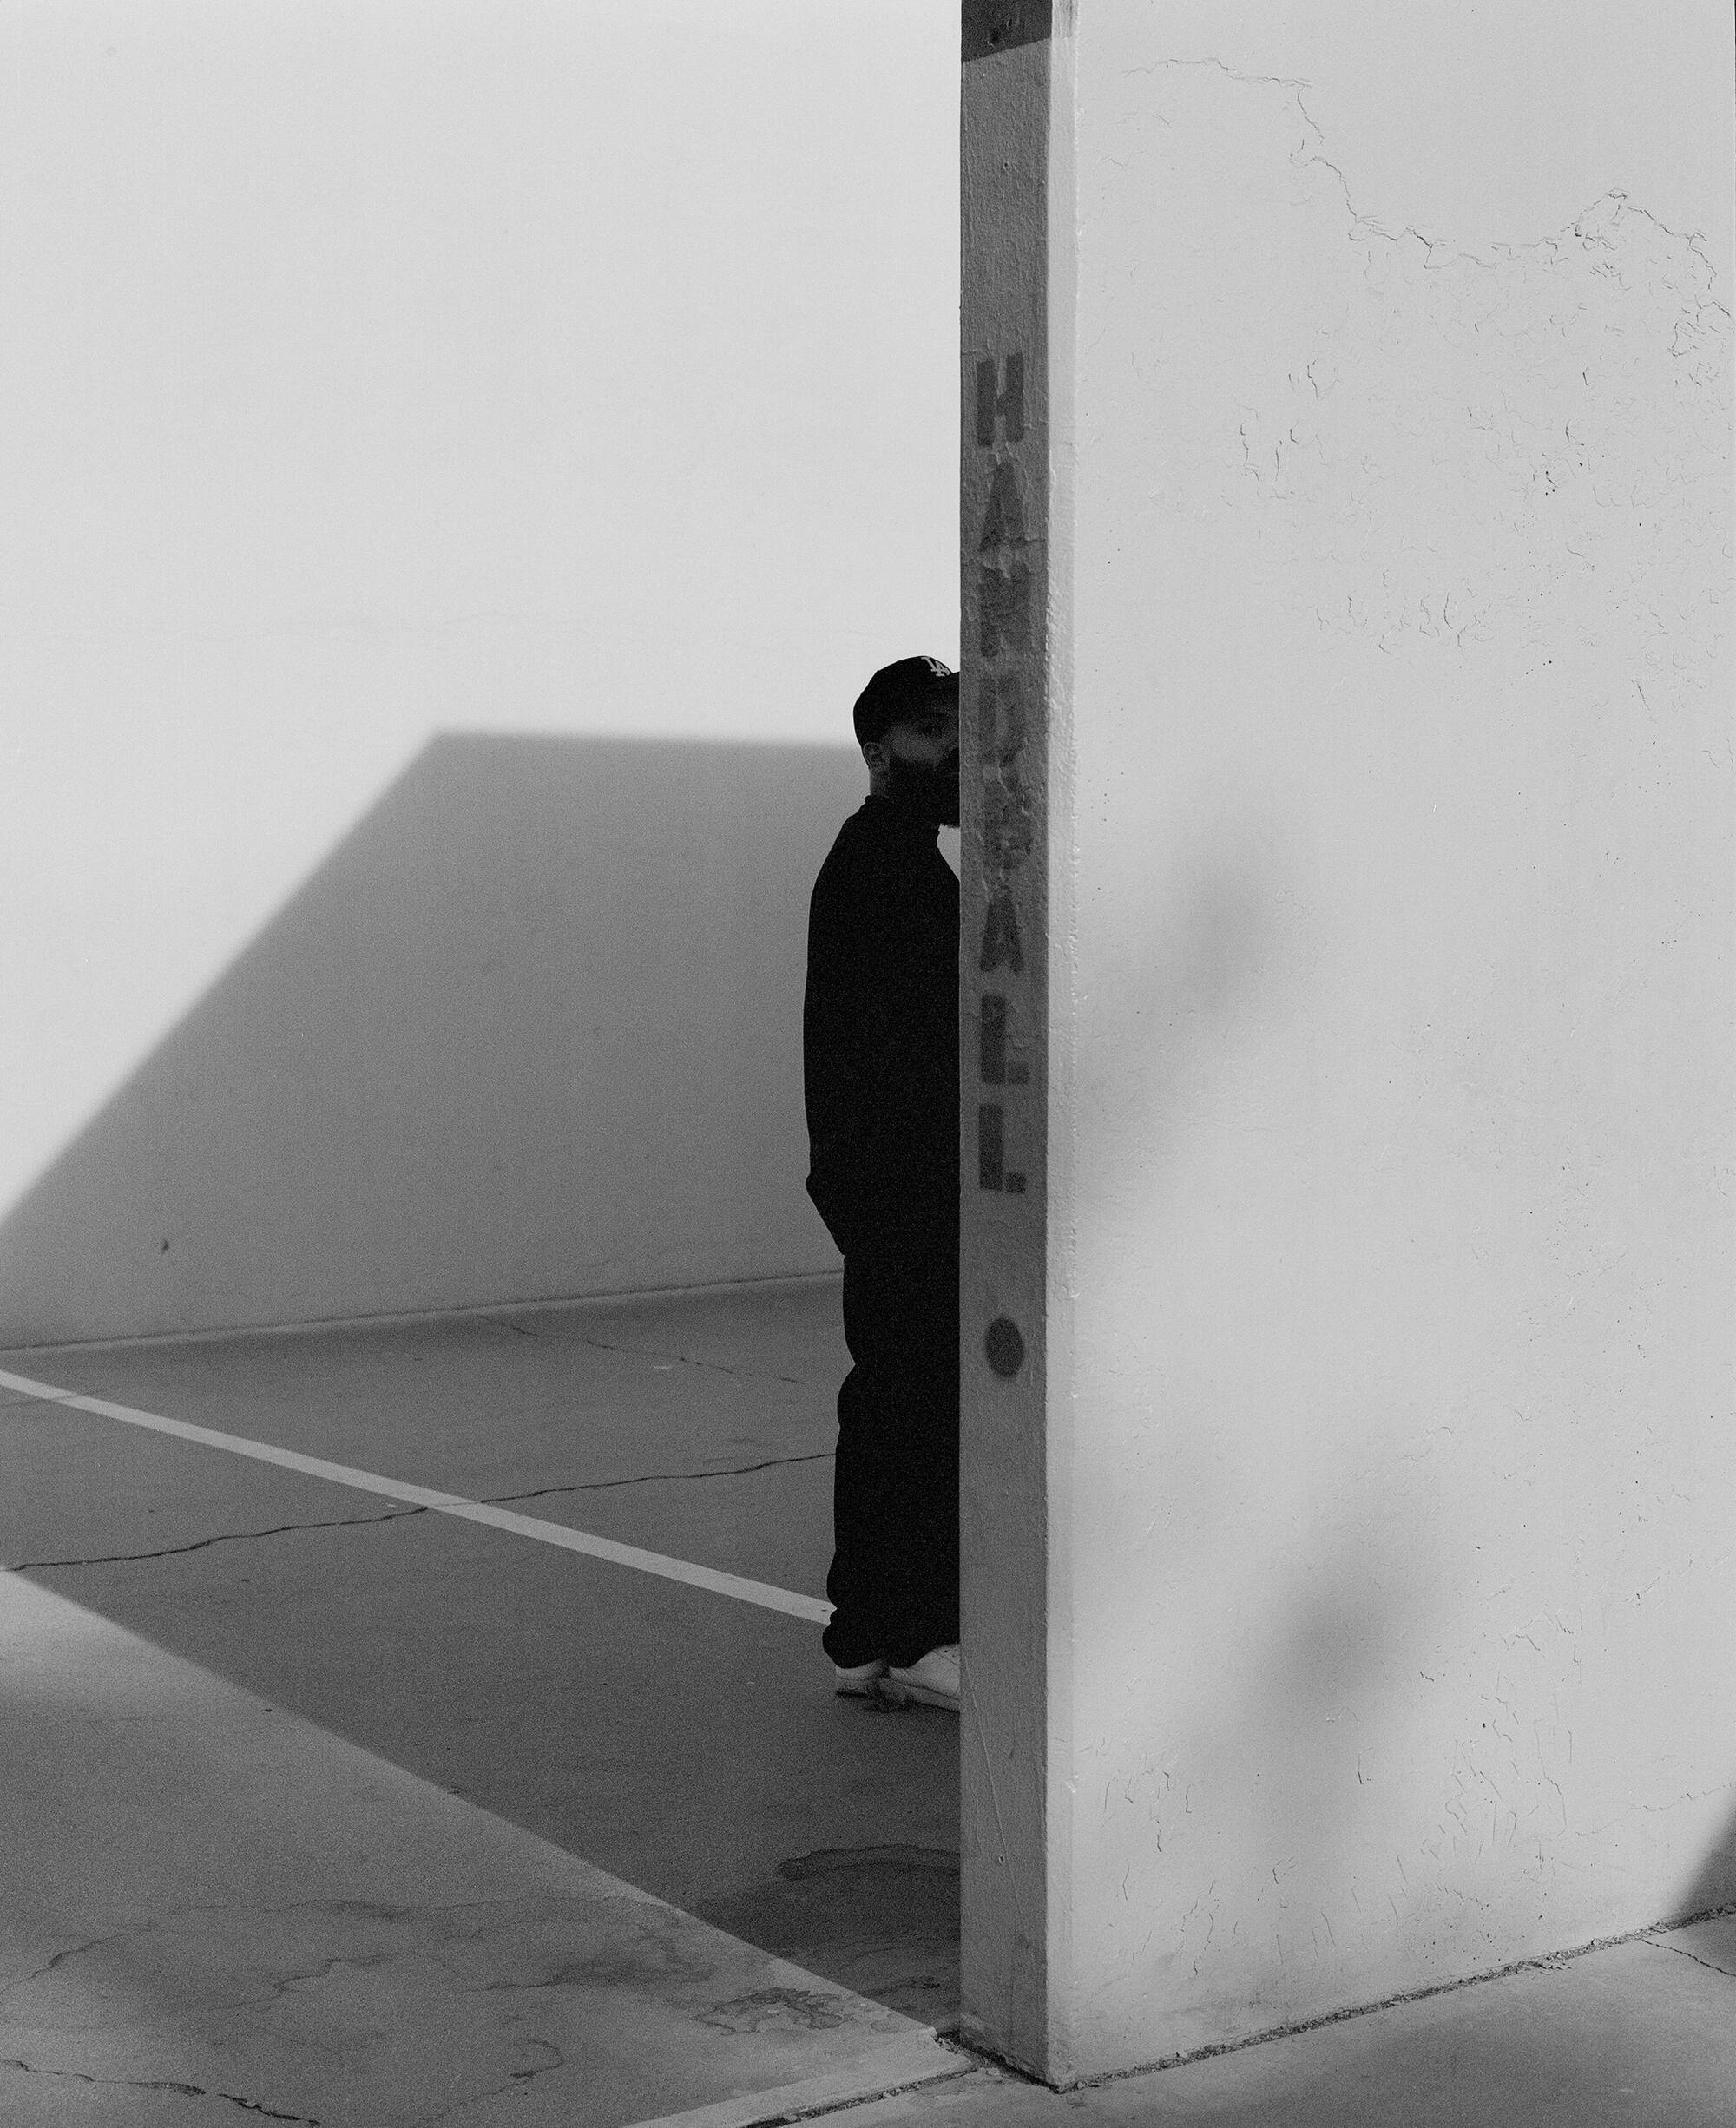 A black and white photo of the founder of Çedouze, Guillermo Juarez, standing behind a handball wall peeking at the camera